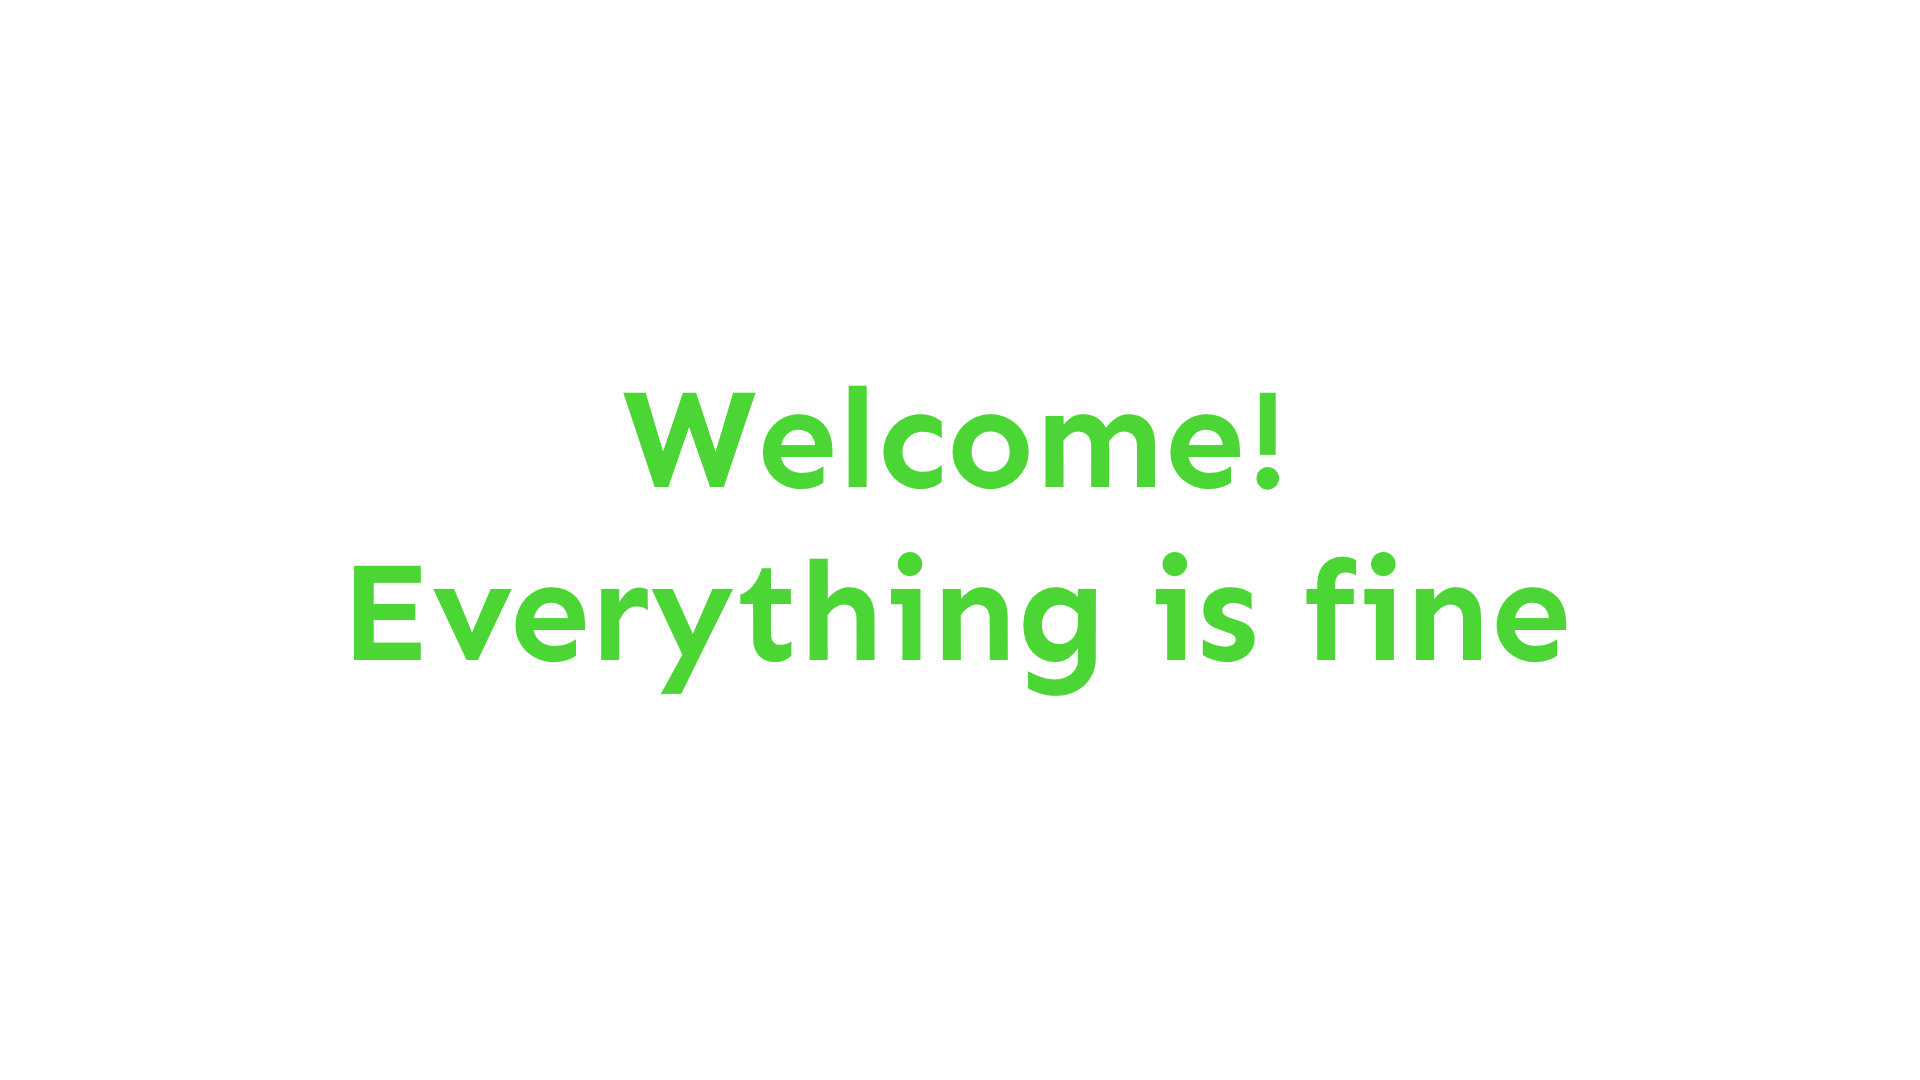 Image of neon green text welcome everything is fine